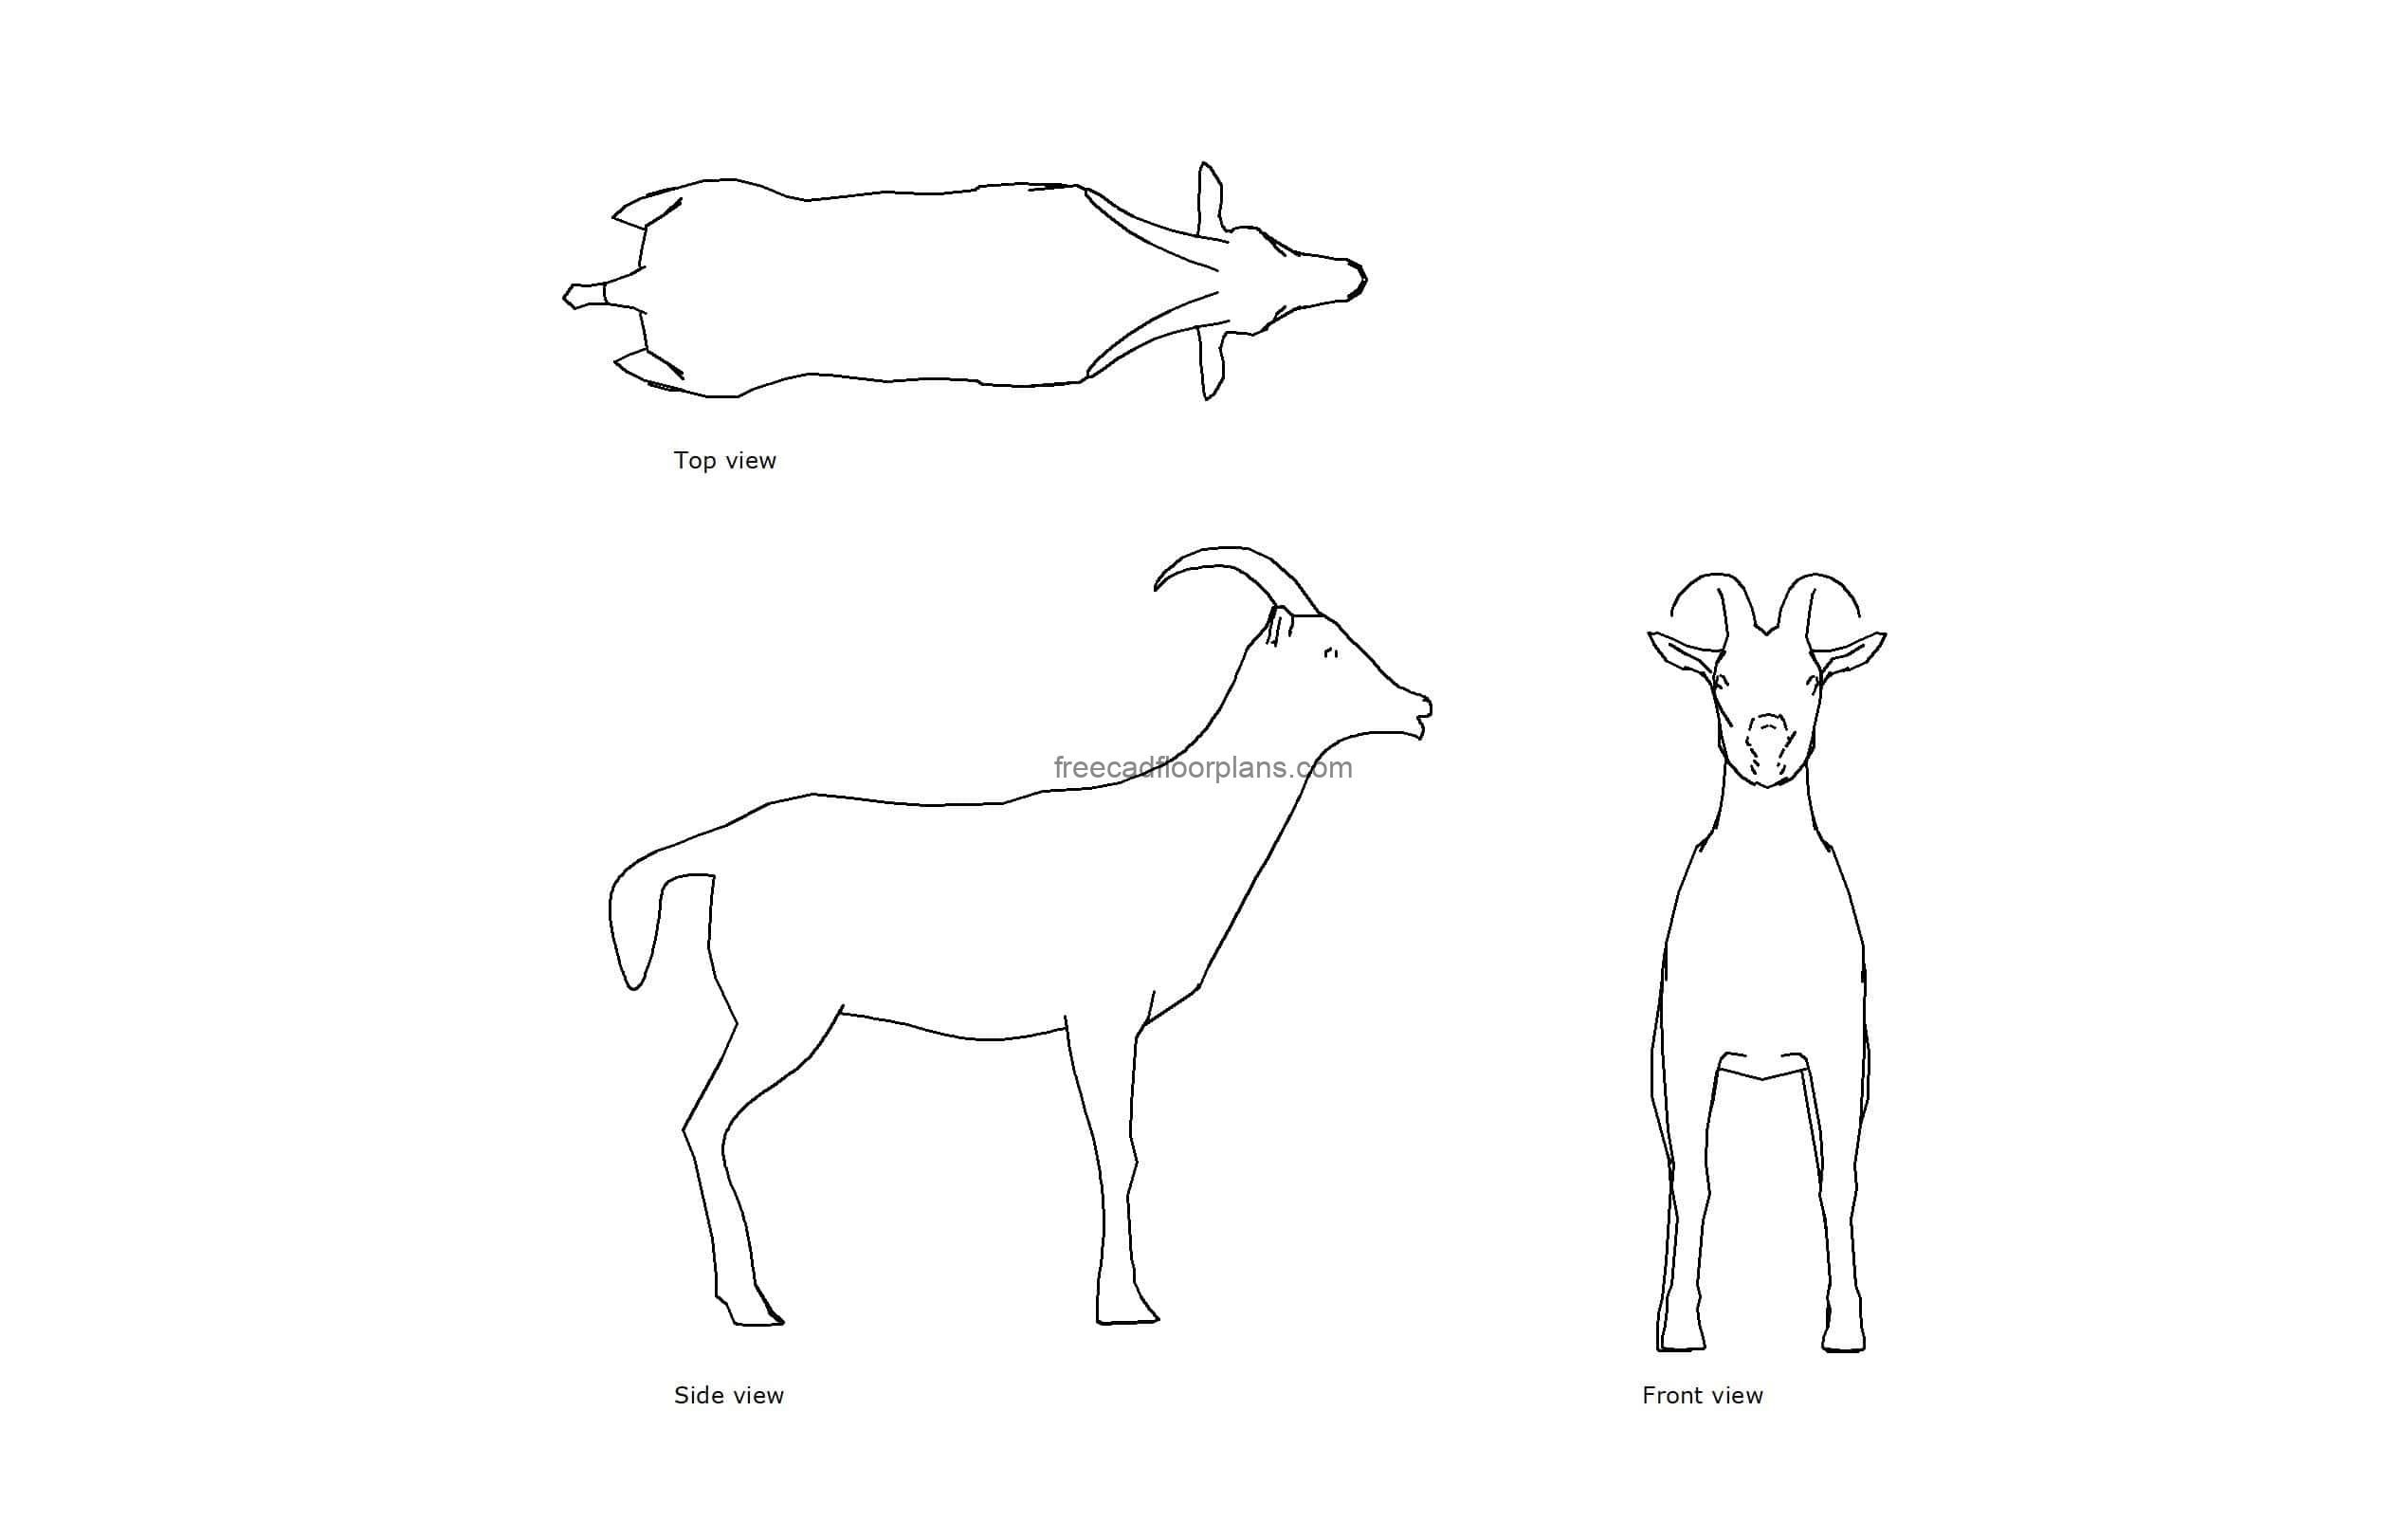 autocad drawing of a goat, plan and elevation 2d views, dwg file free for download